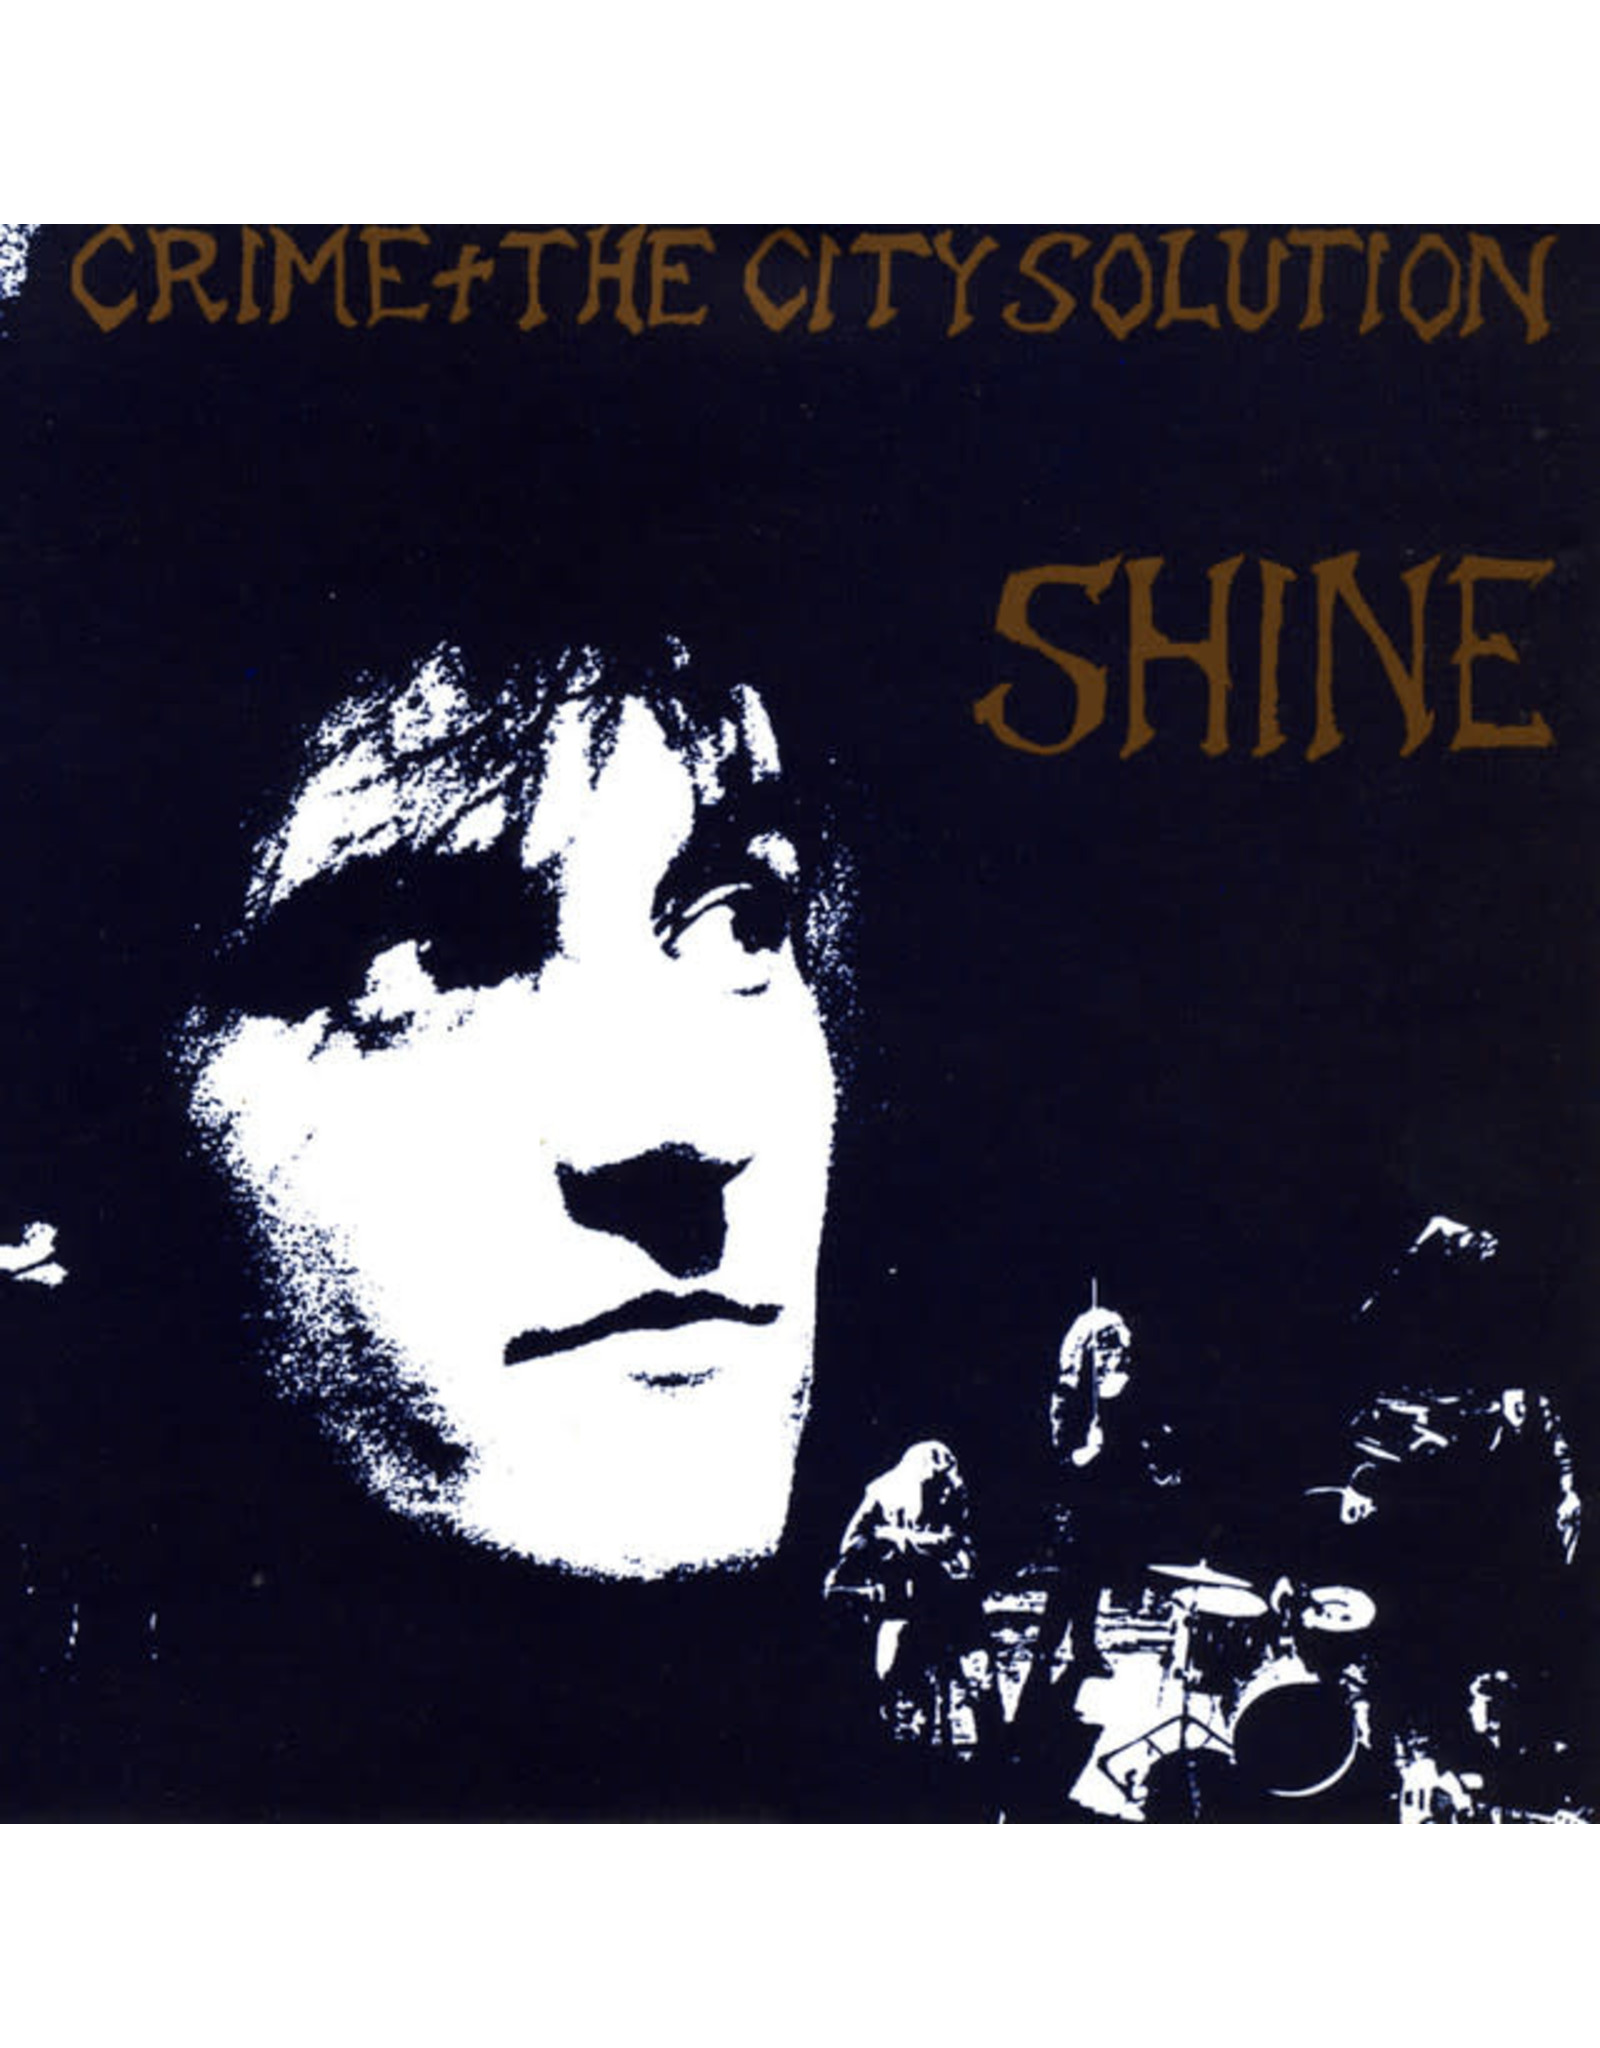 Mute Crime and The City Solution: Shine LP